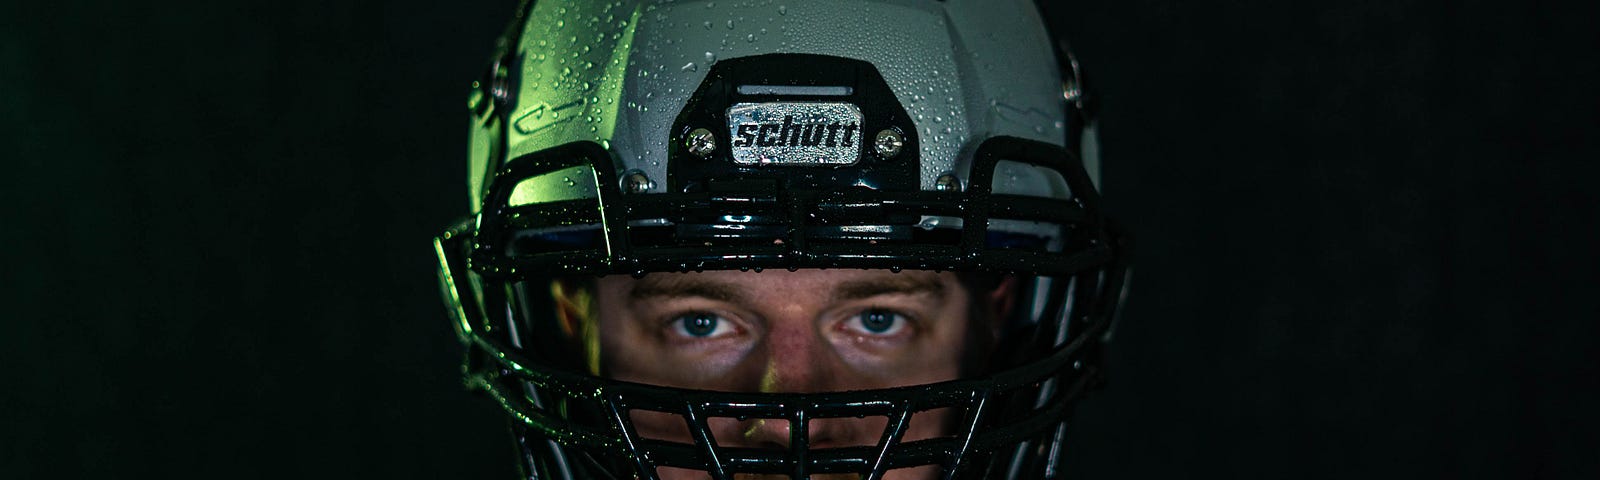 A man wearing a football helmet, gazing straight at the camera